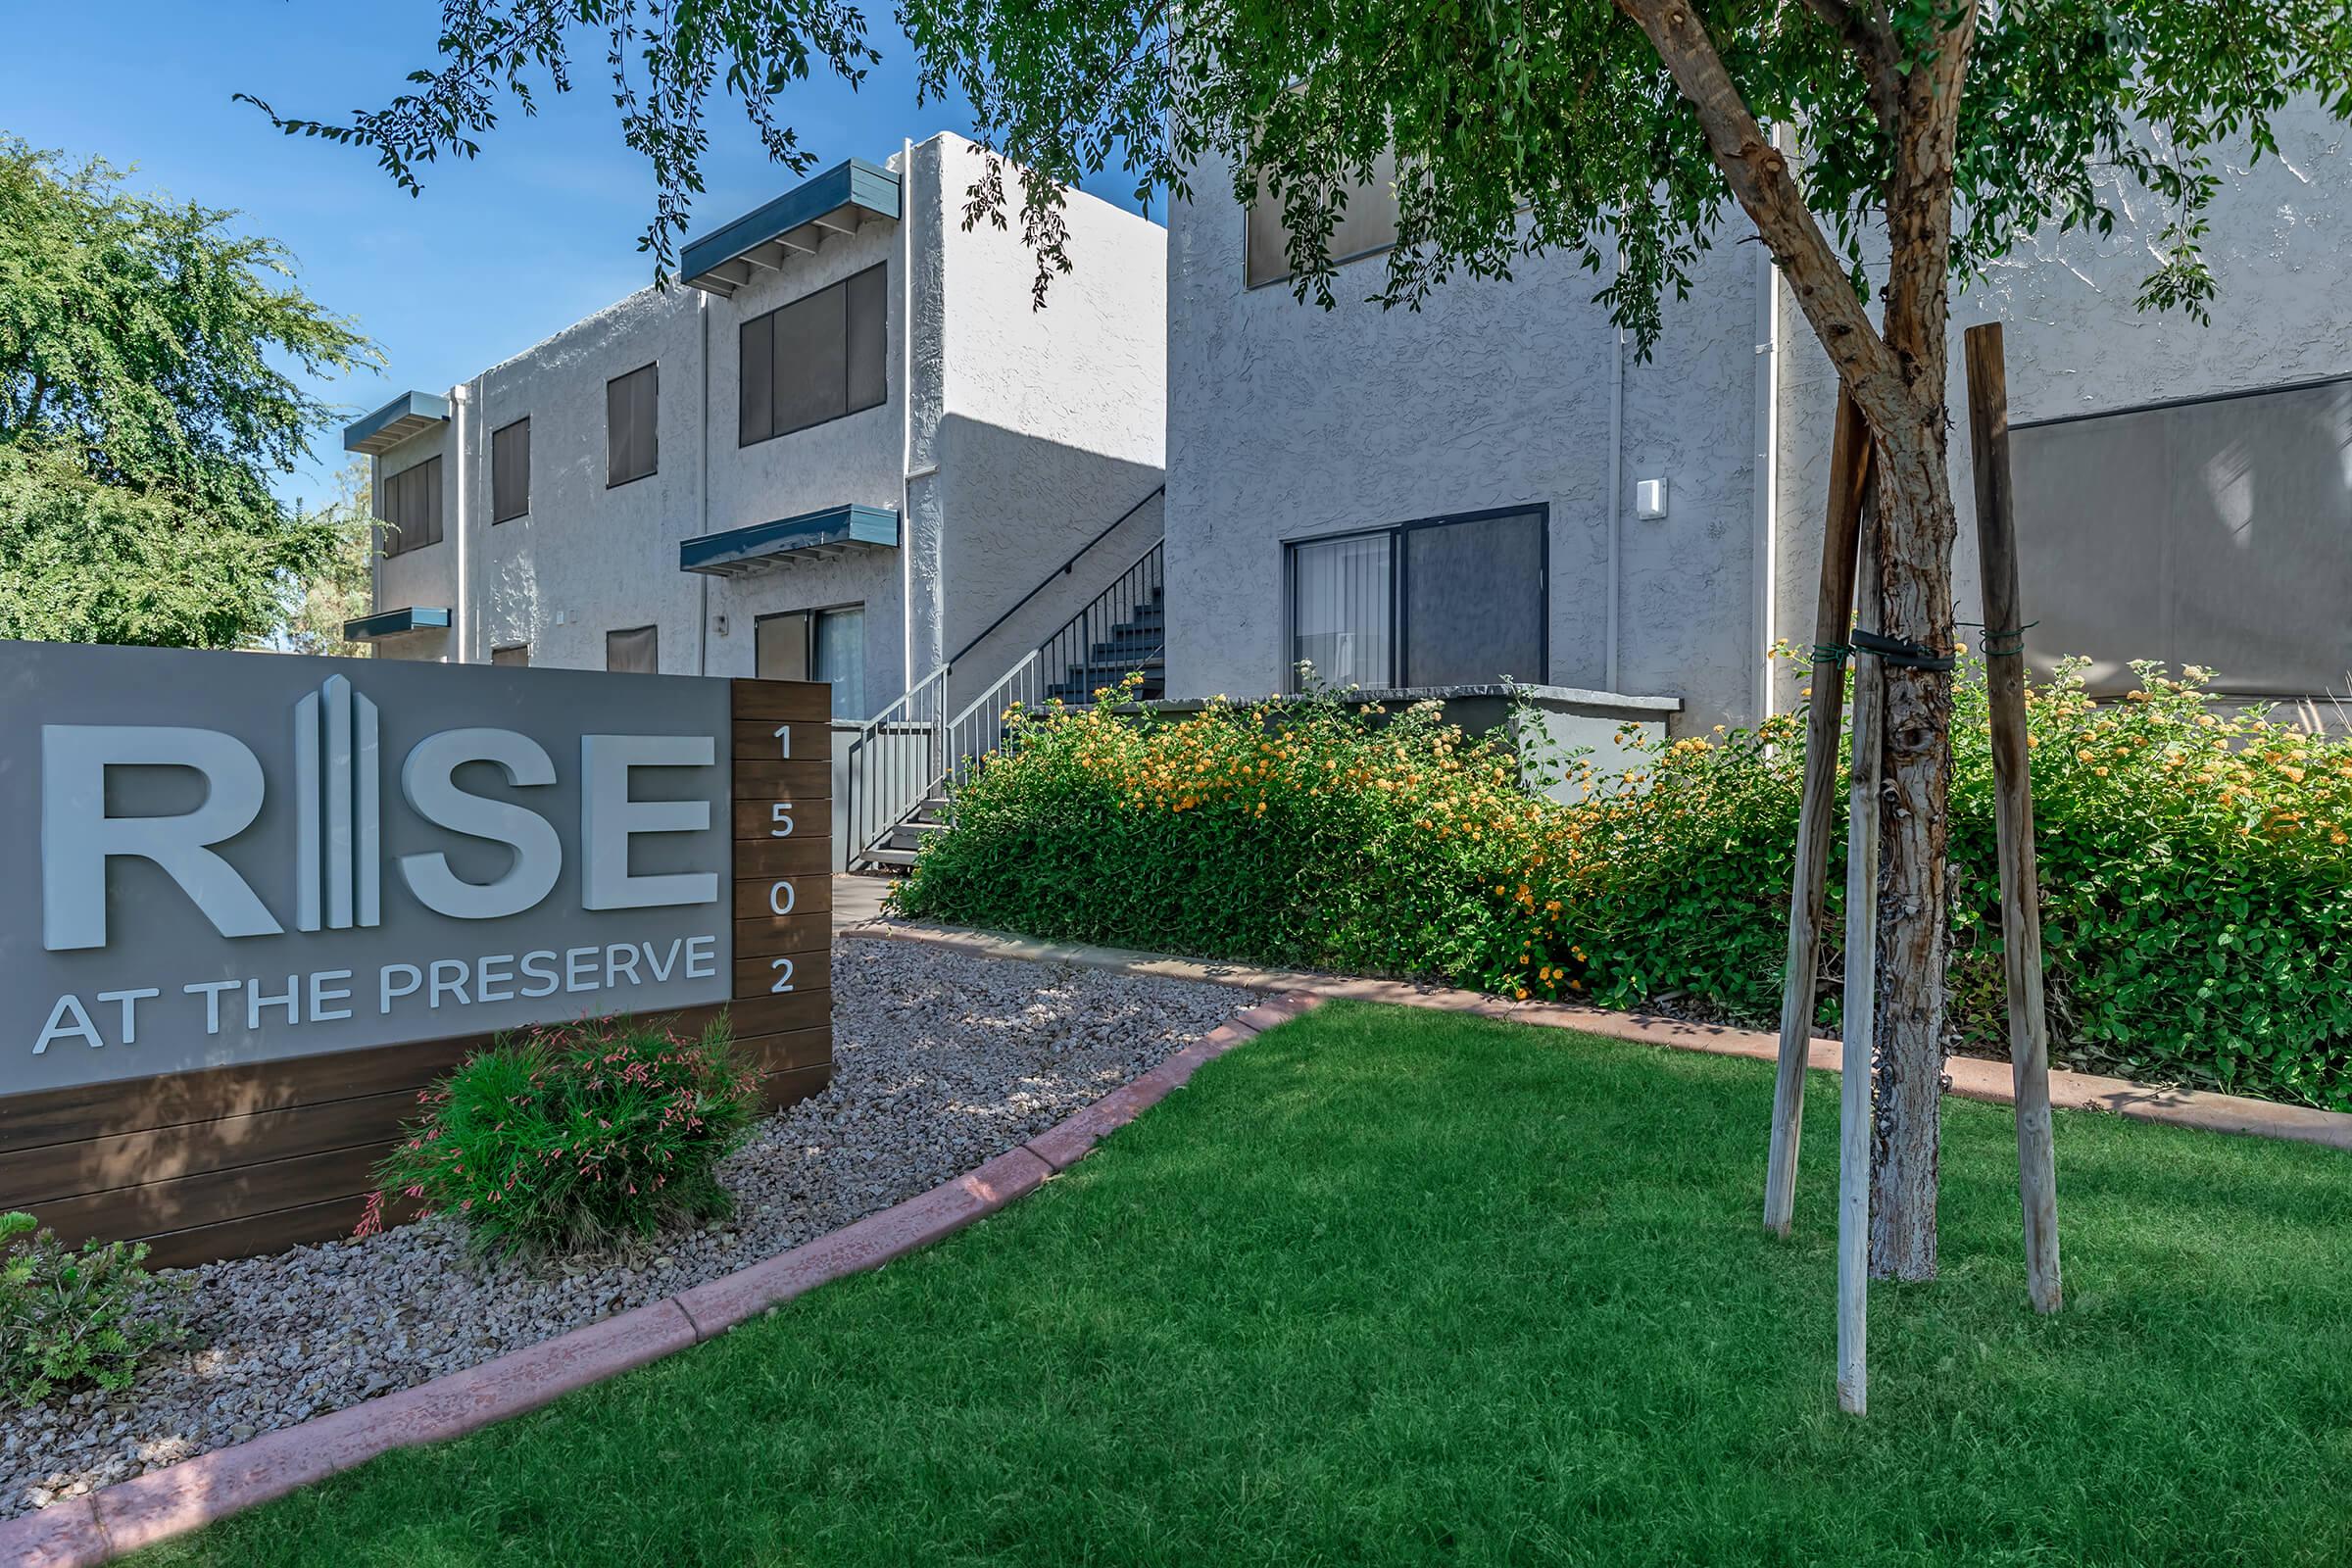 Outdoor view of the Rise at the Preserve sign in front of an apartment building